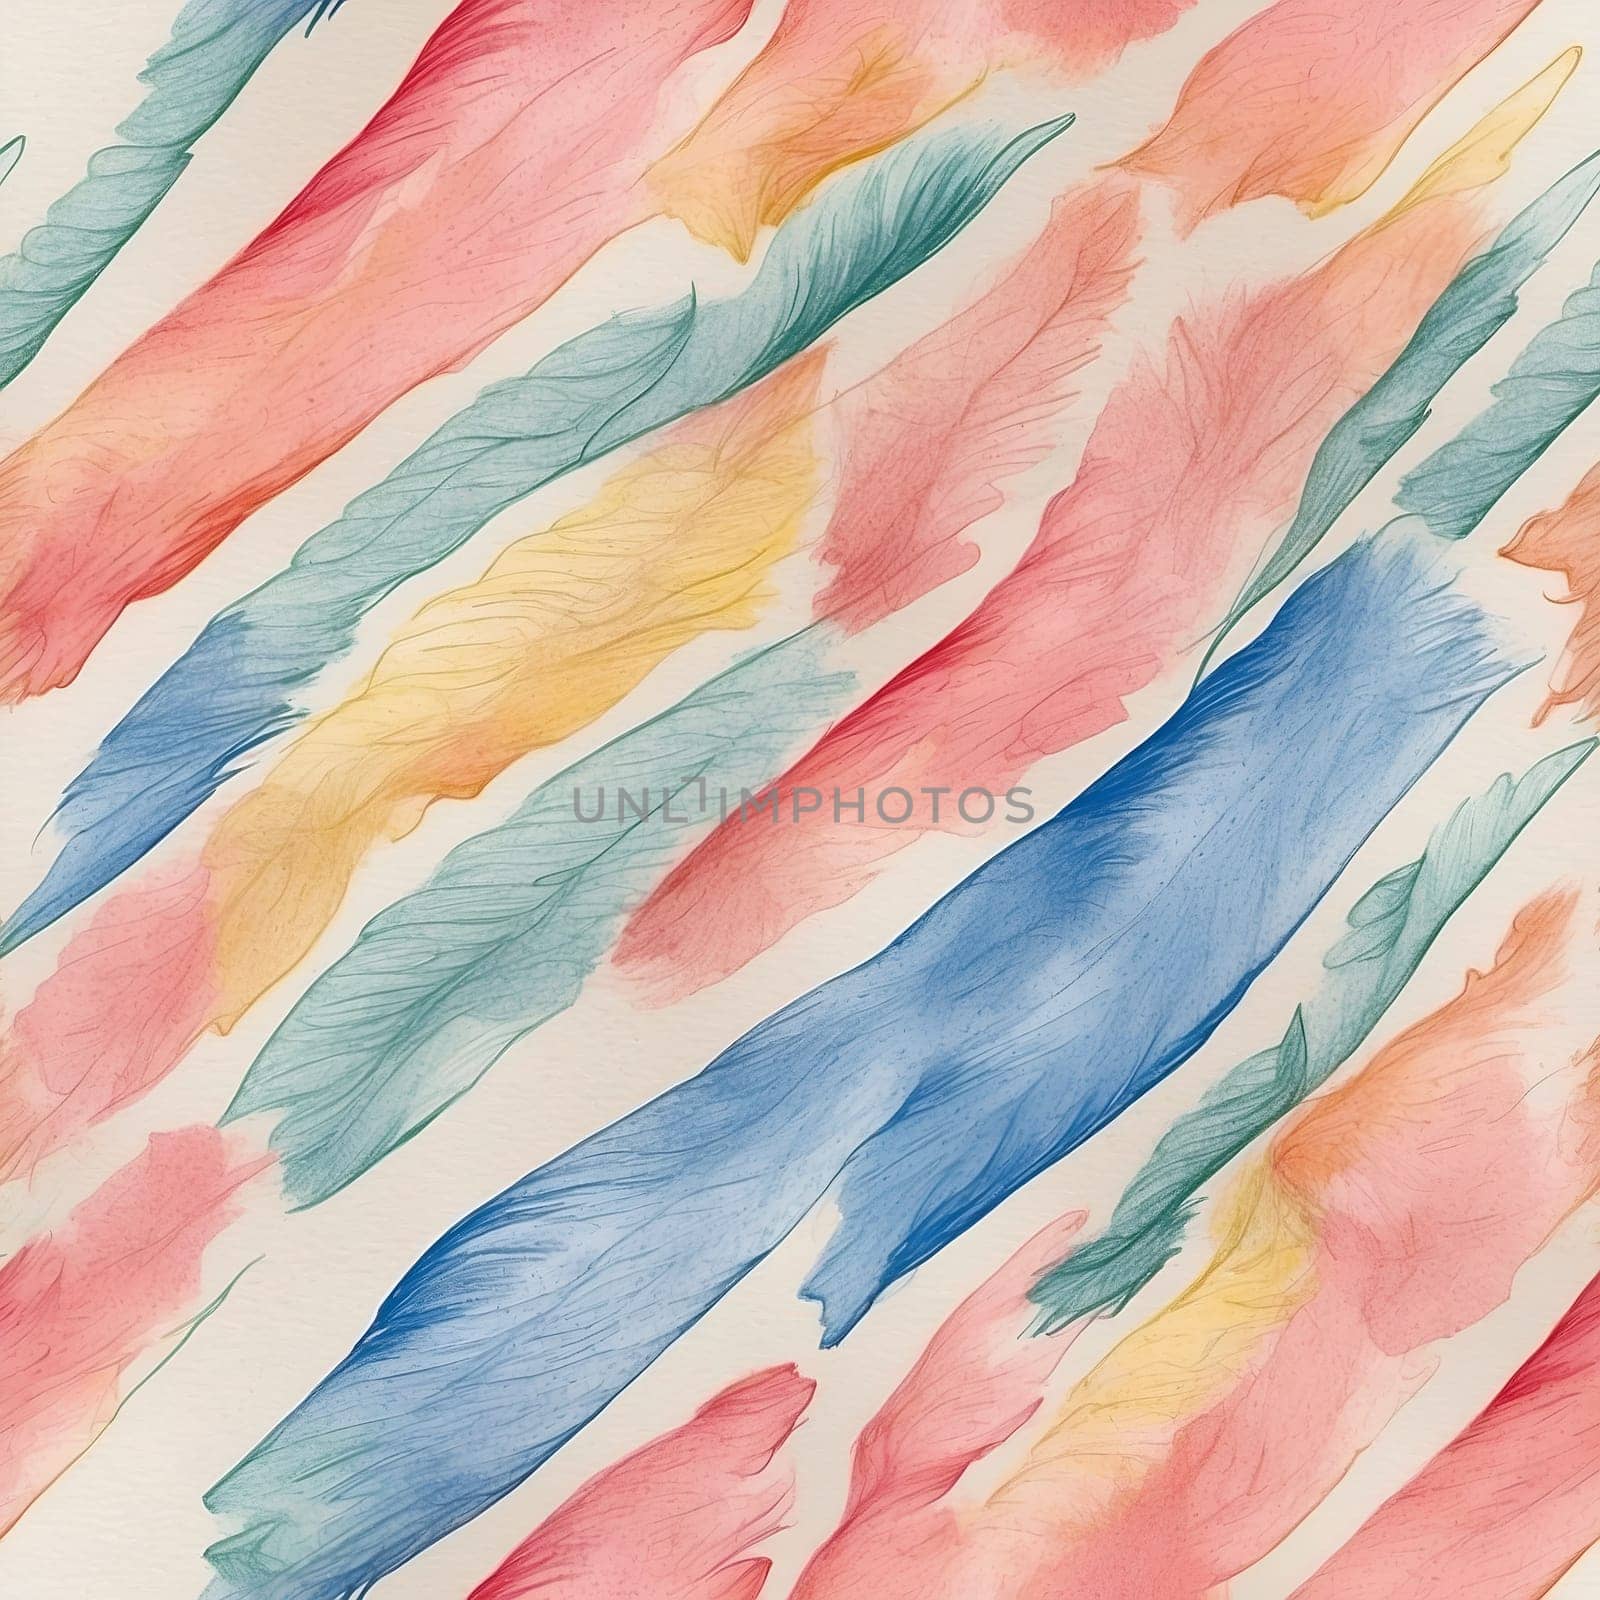 A seamless pattern featuring a painting of vibrant feathers against a white background.